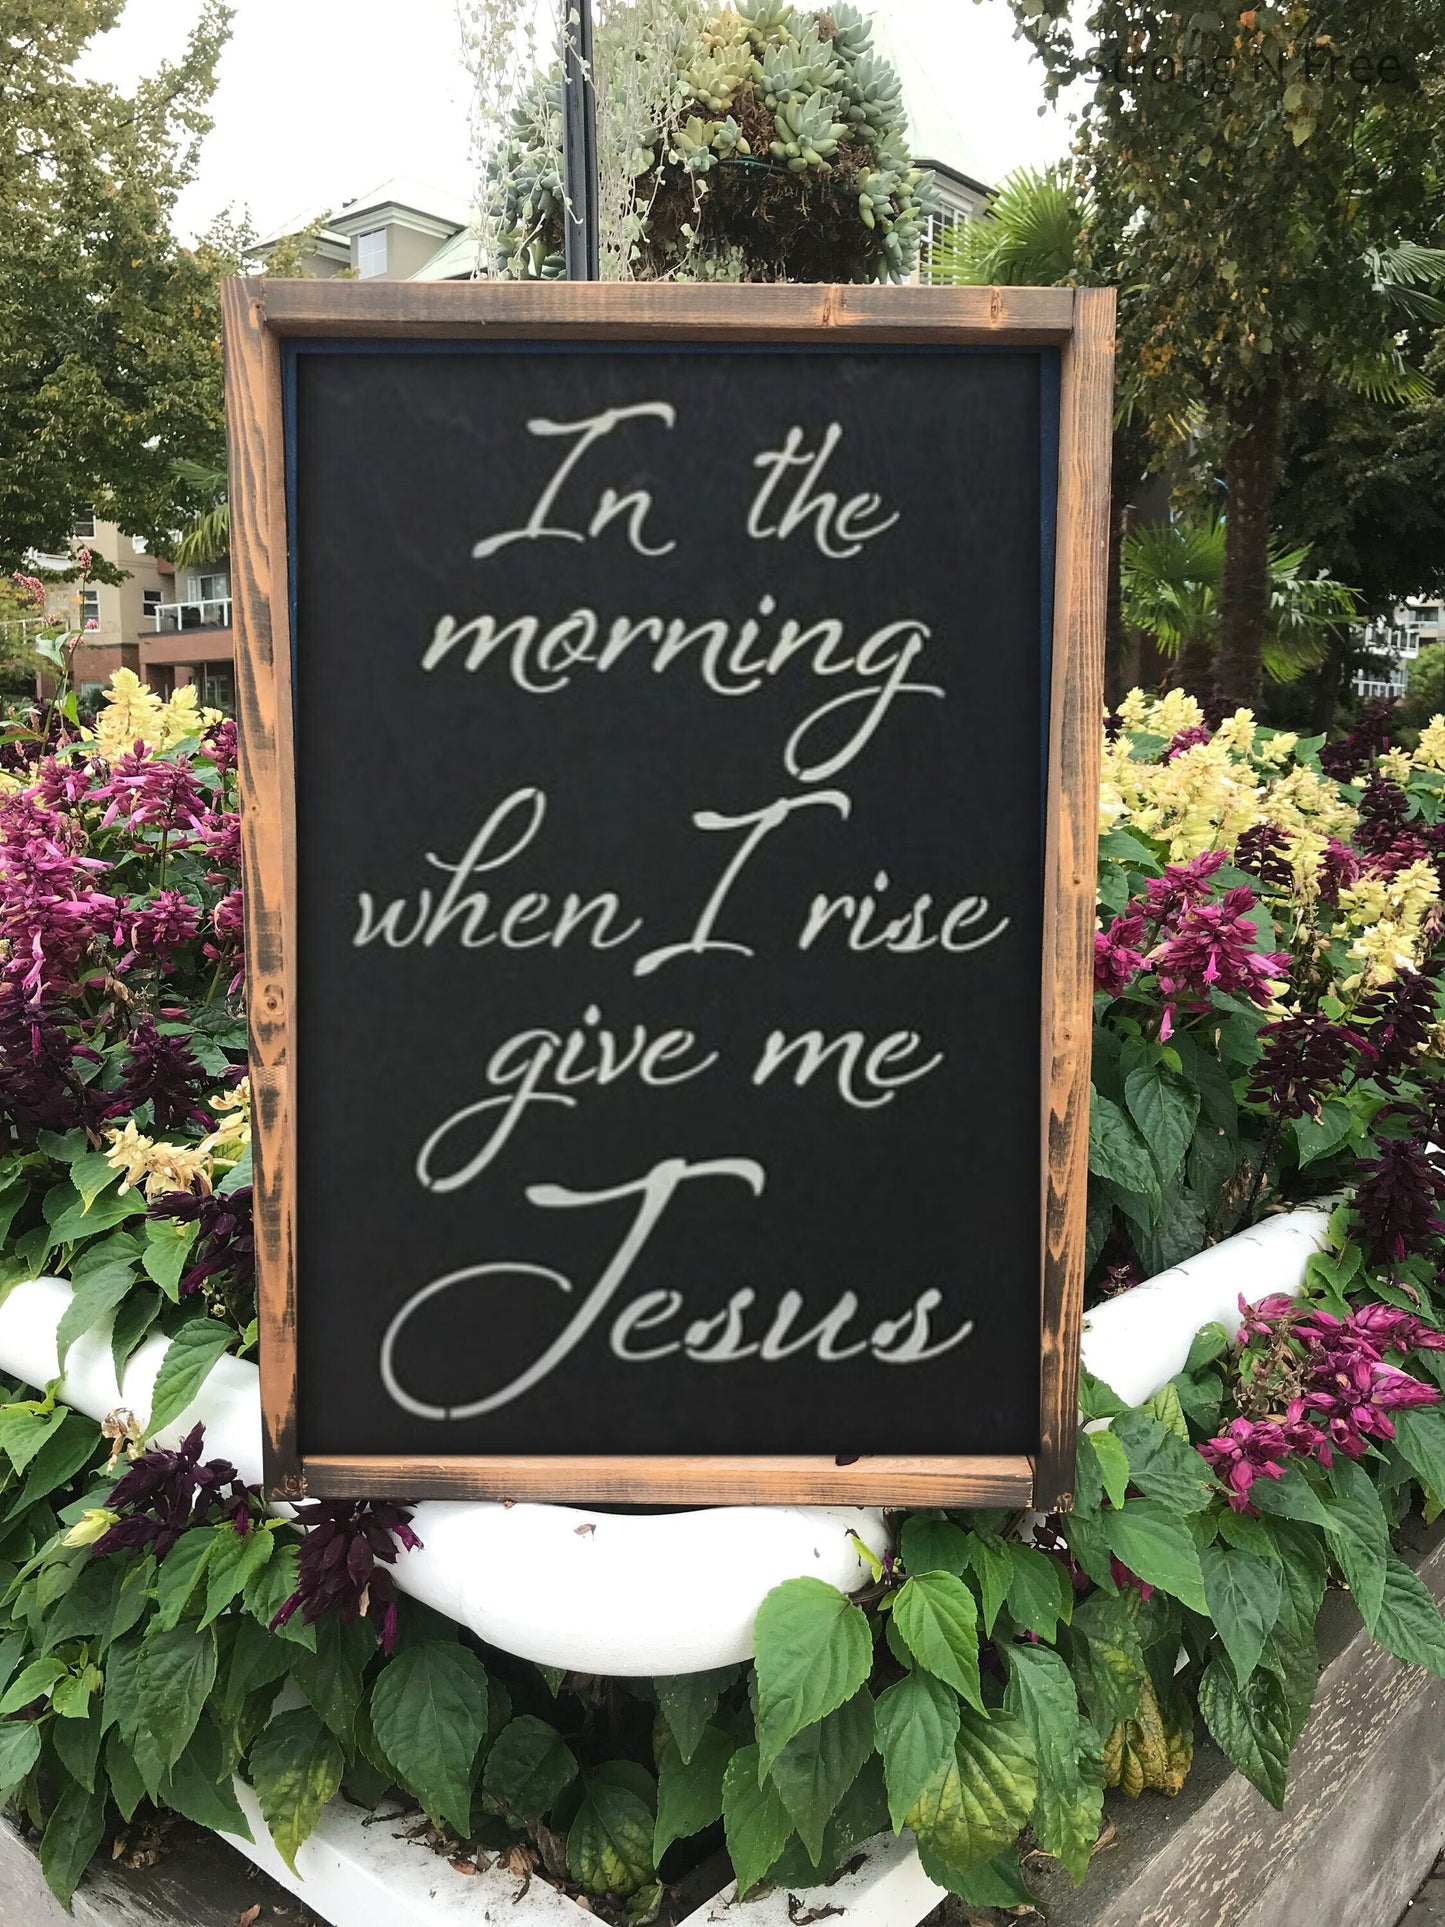 12" x 18 |  In The Morning When I Rise Give Me Jesus |  wooden sign  |  wedding gift |  rustic wooden sign |  farmhouse decor